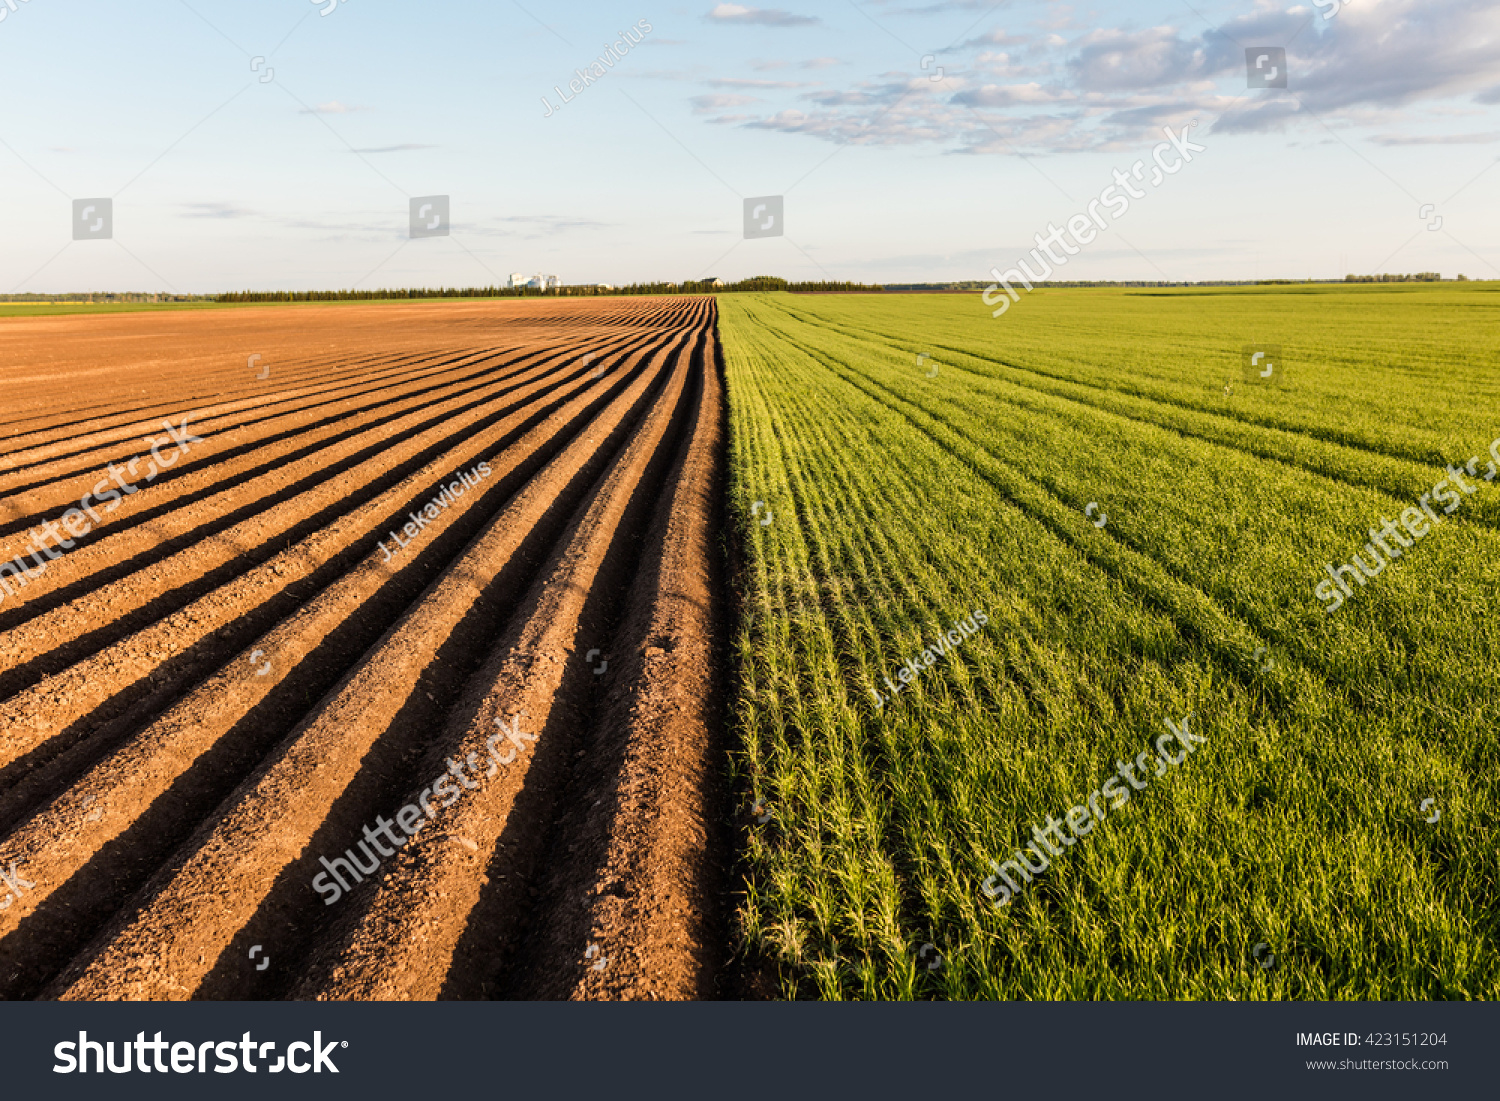 Furrows row pattern in a plowed field prepared for planting crops in spring. Growing wheat crop in springtime. Horizontal view in perspective with cloud and blue sky background. #423151204